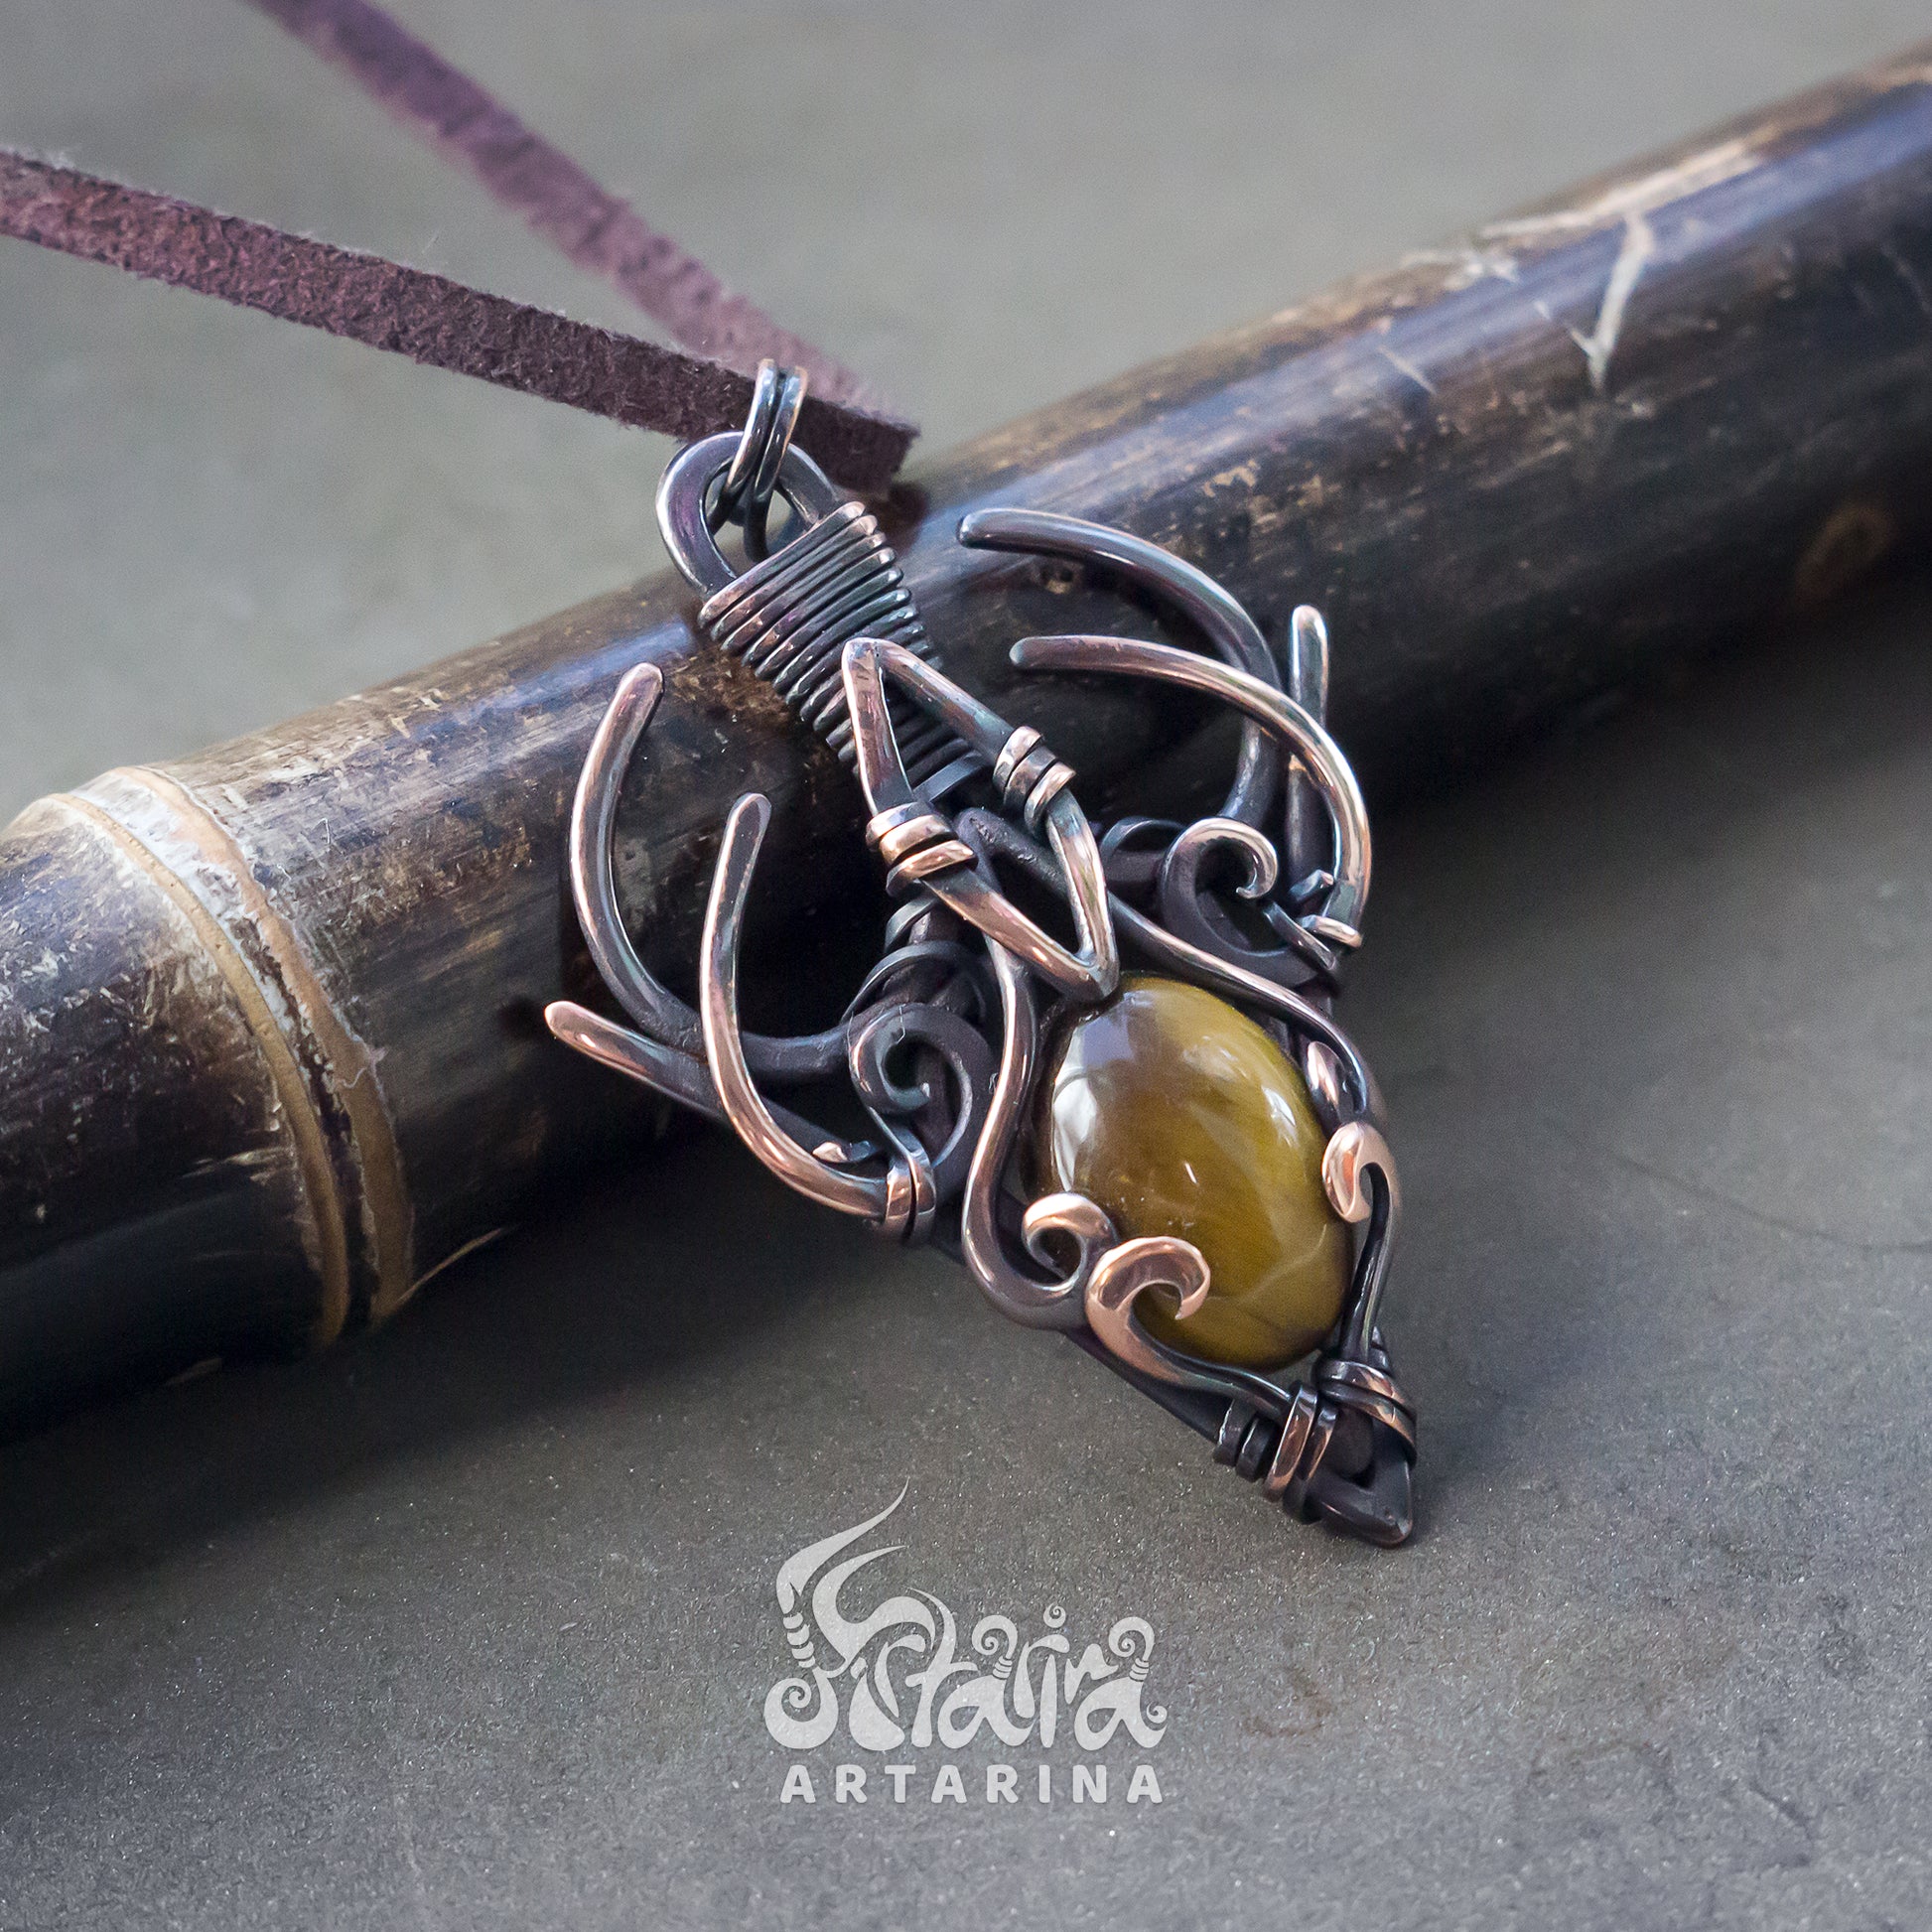 Handmade pure copper wire wrapped necklace with natural tiger's eye stone pic 1